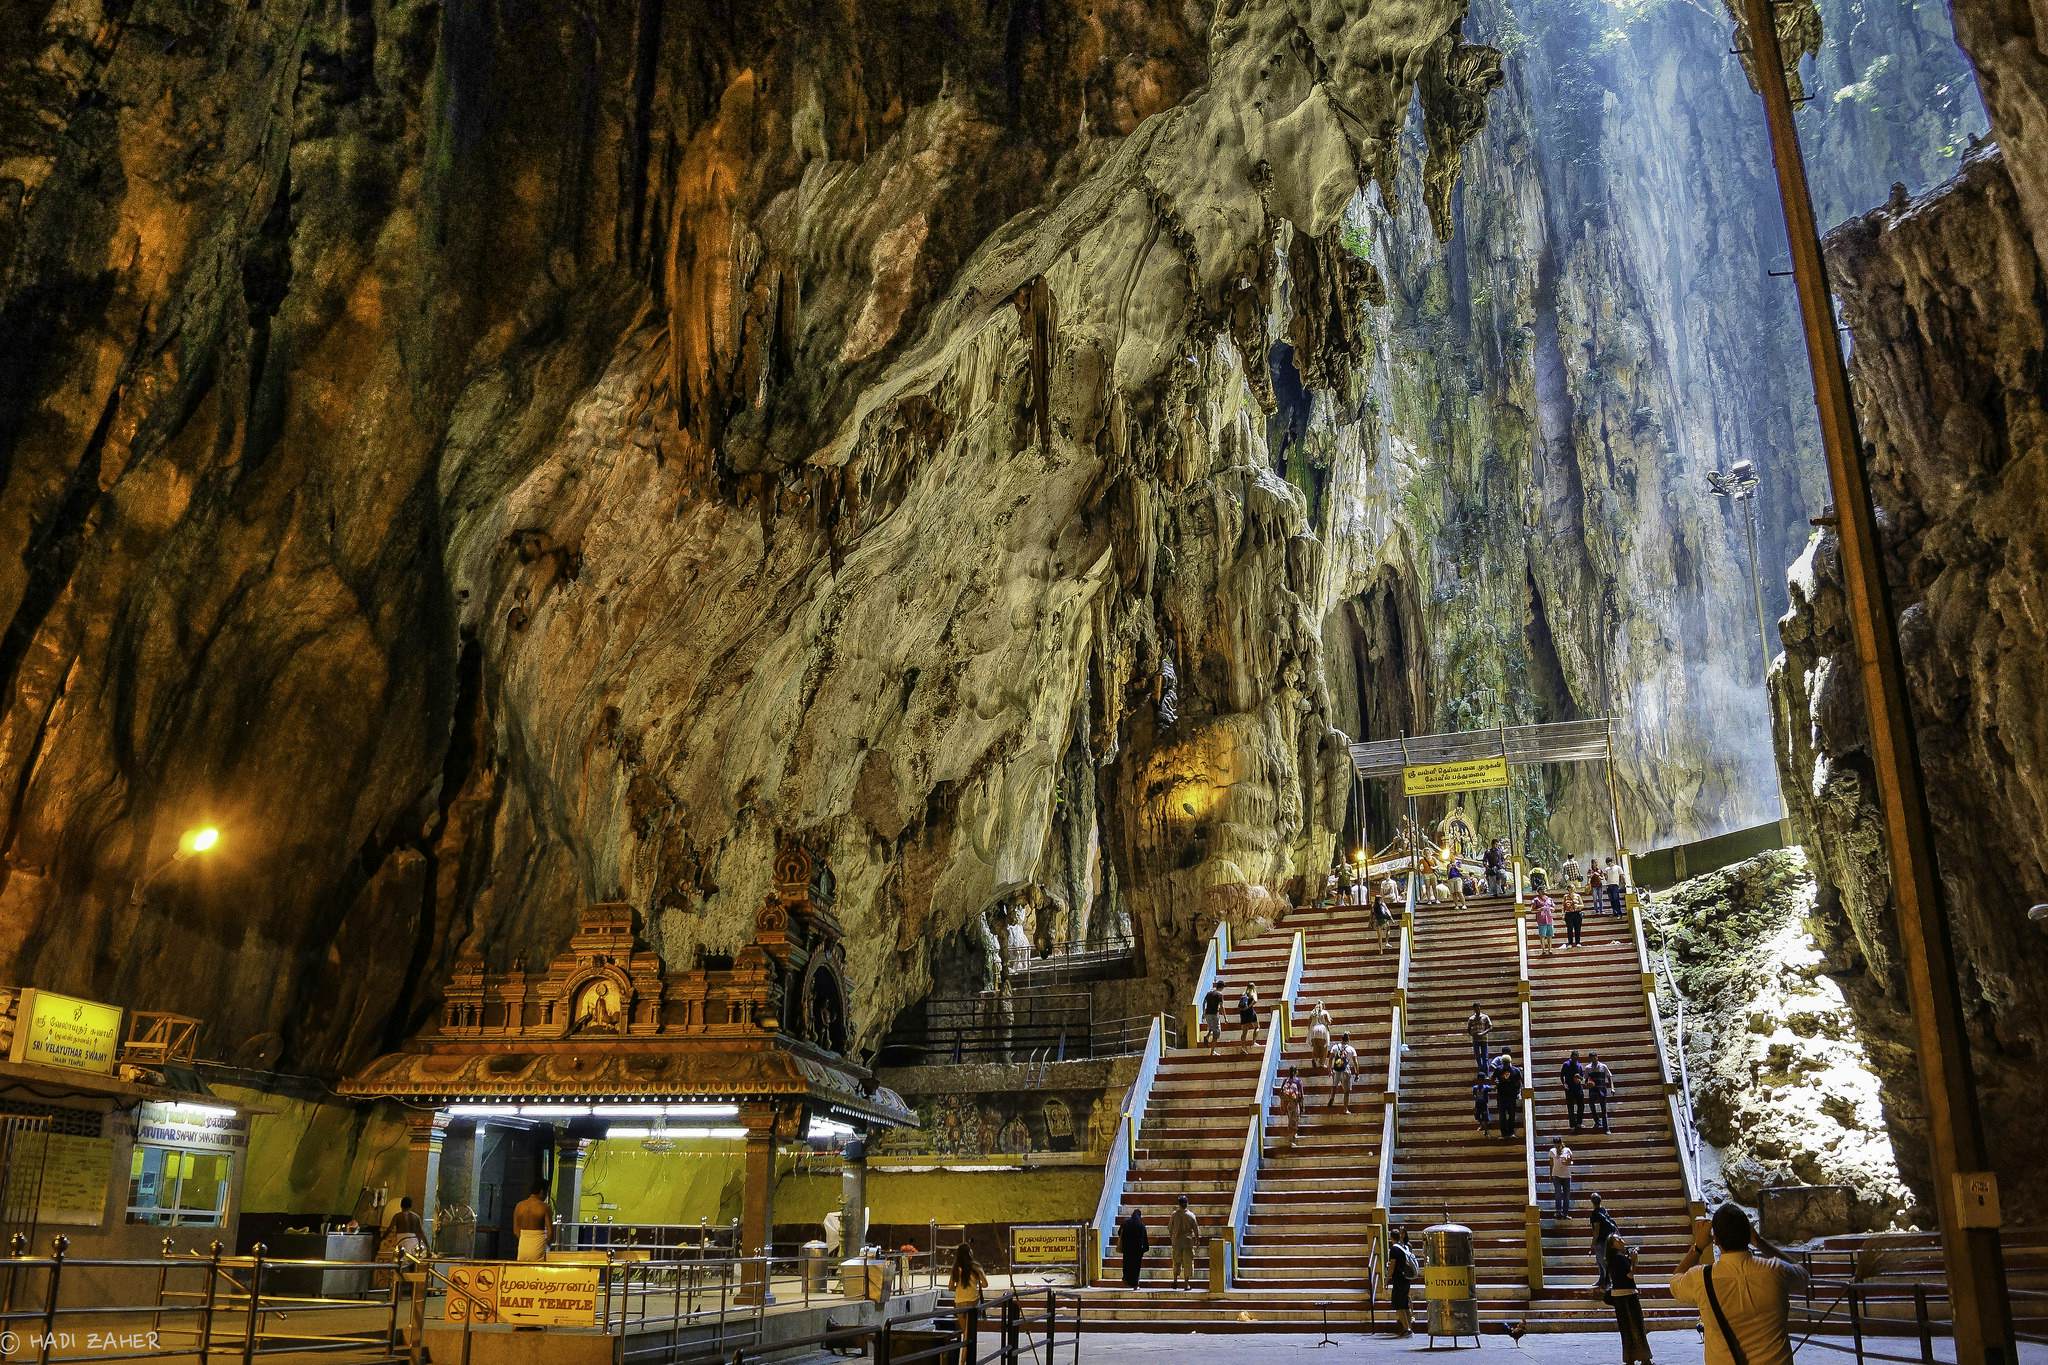 Batu caves + genting highlands tour with cable car ride